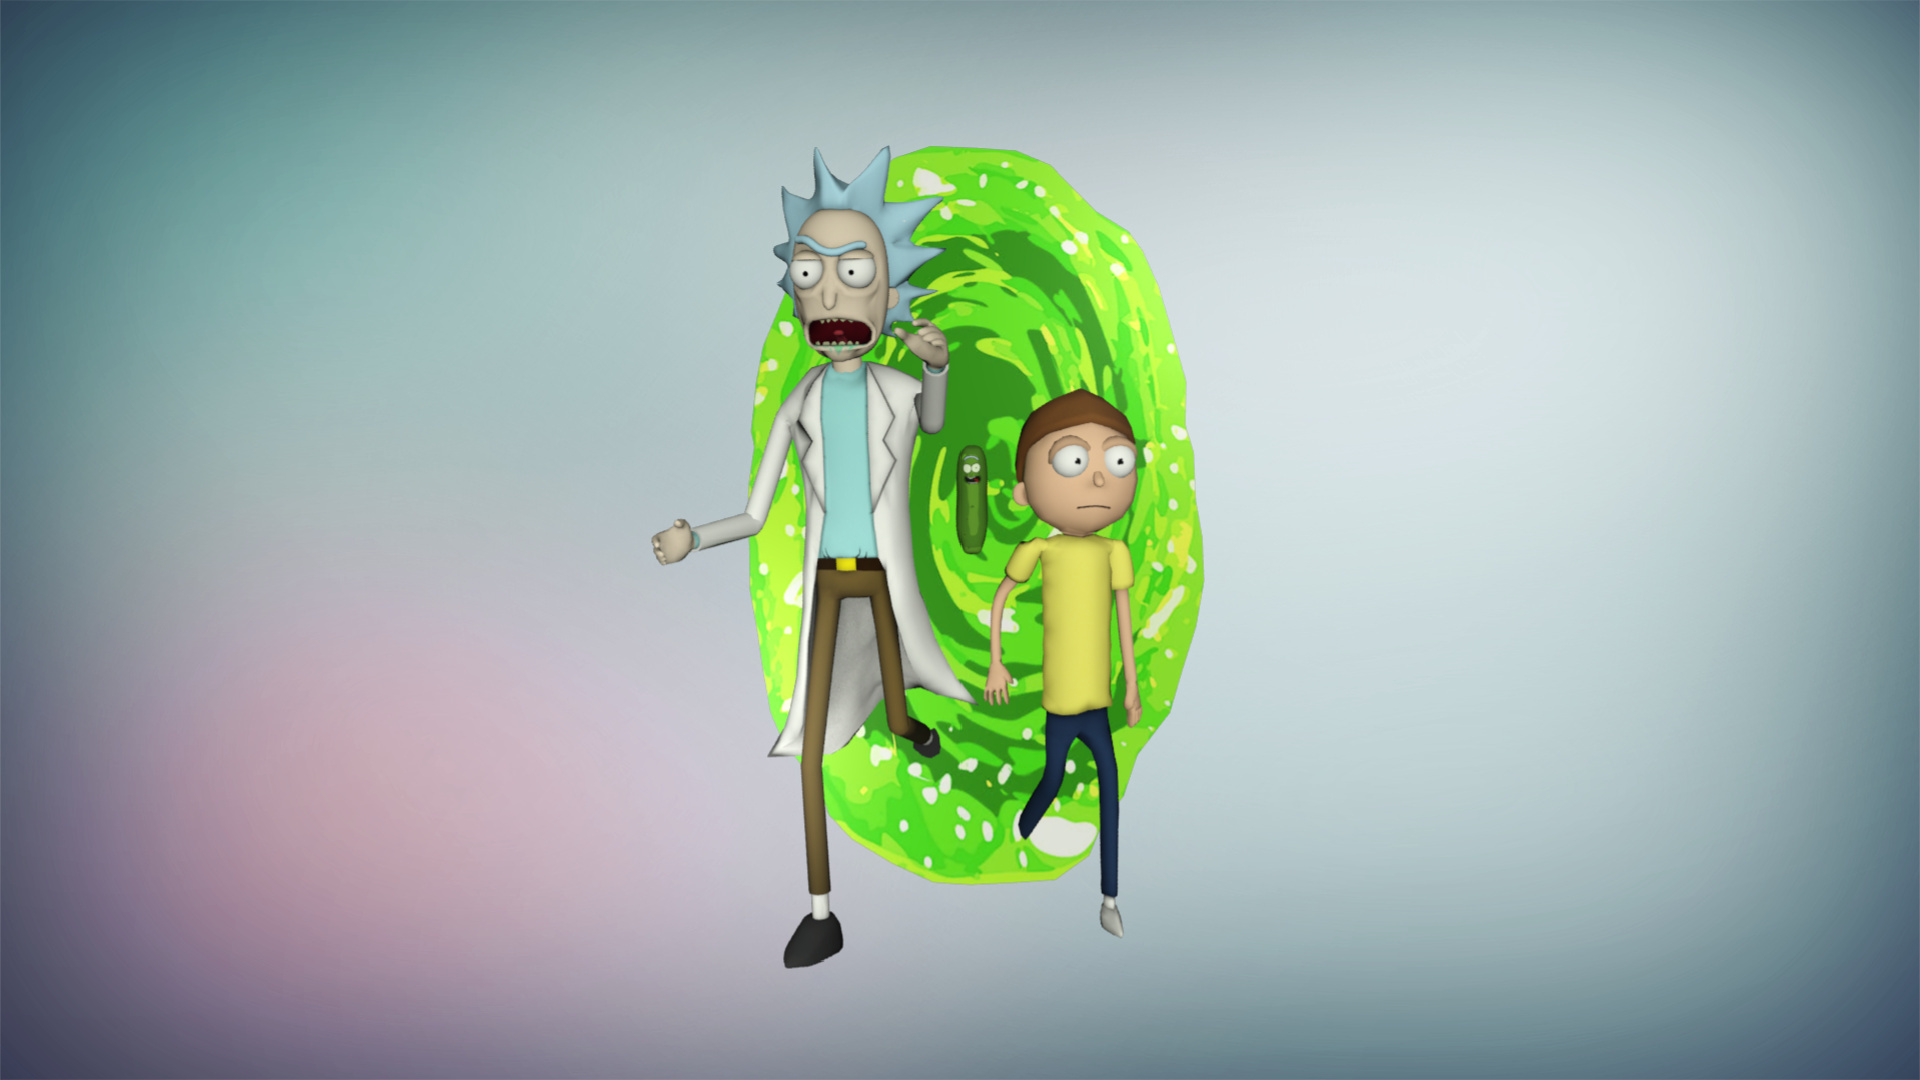 FREE] Rick and Morty Workshop Showcase (animated) by Nosk122 on DeviantArt